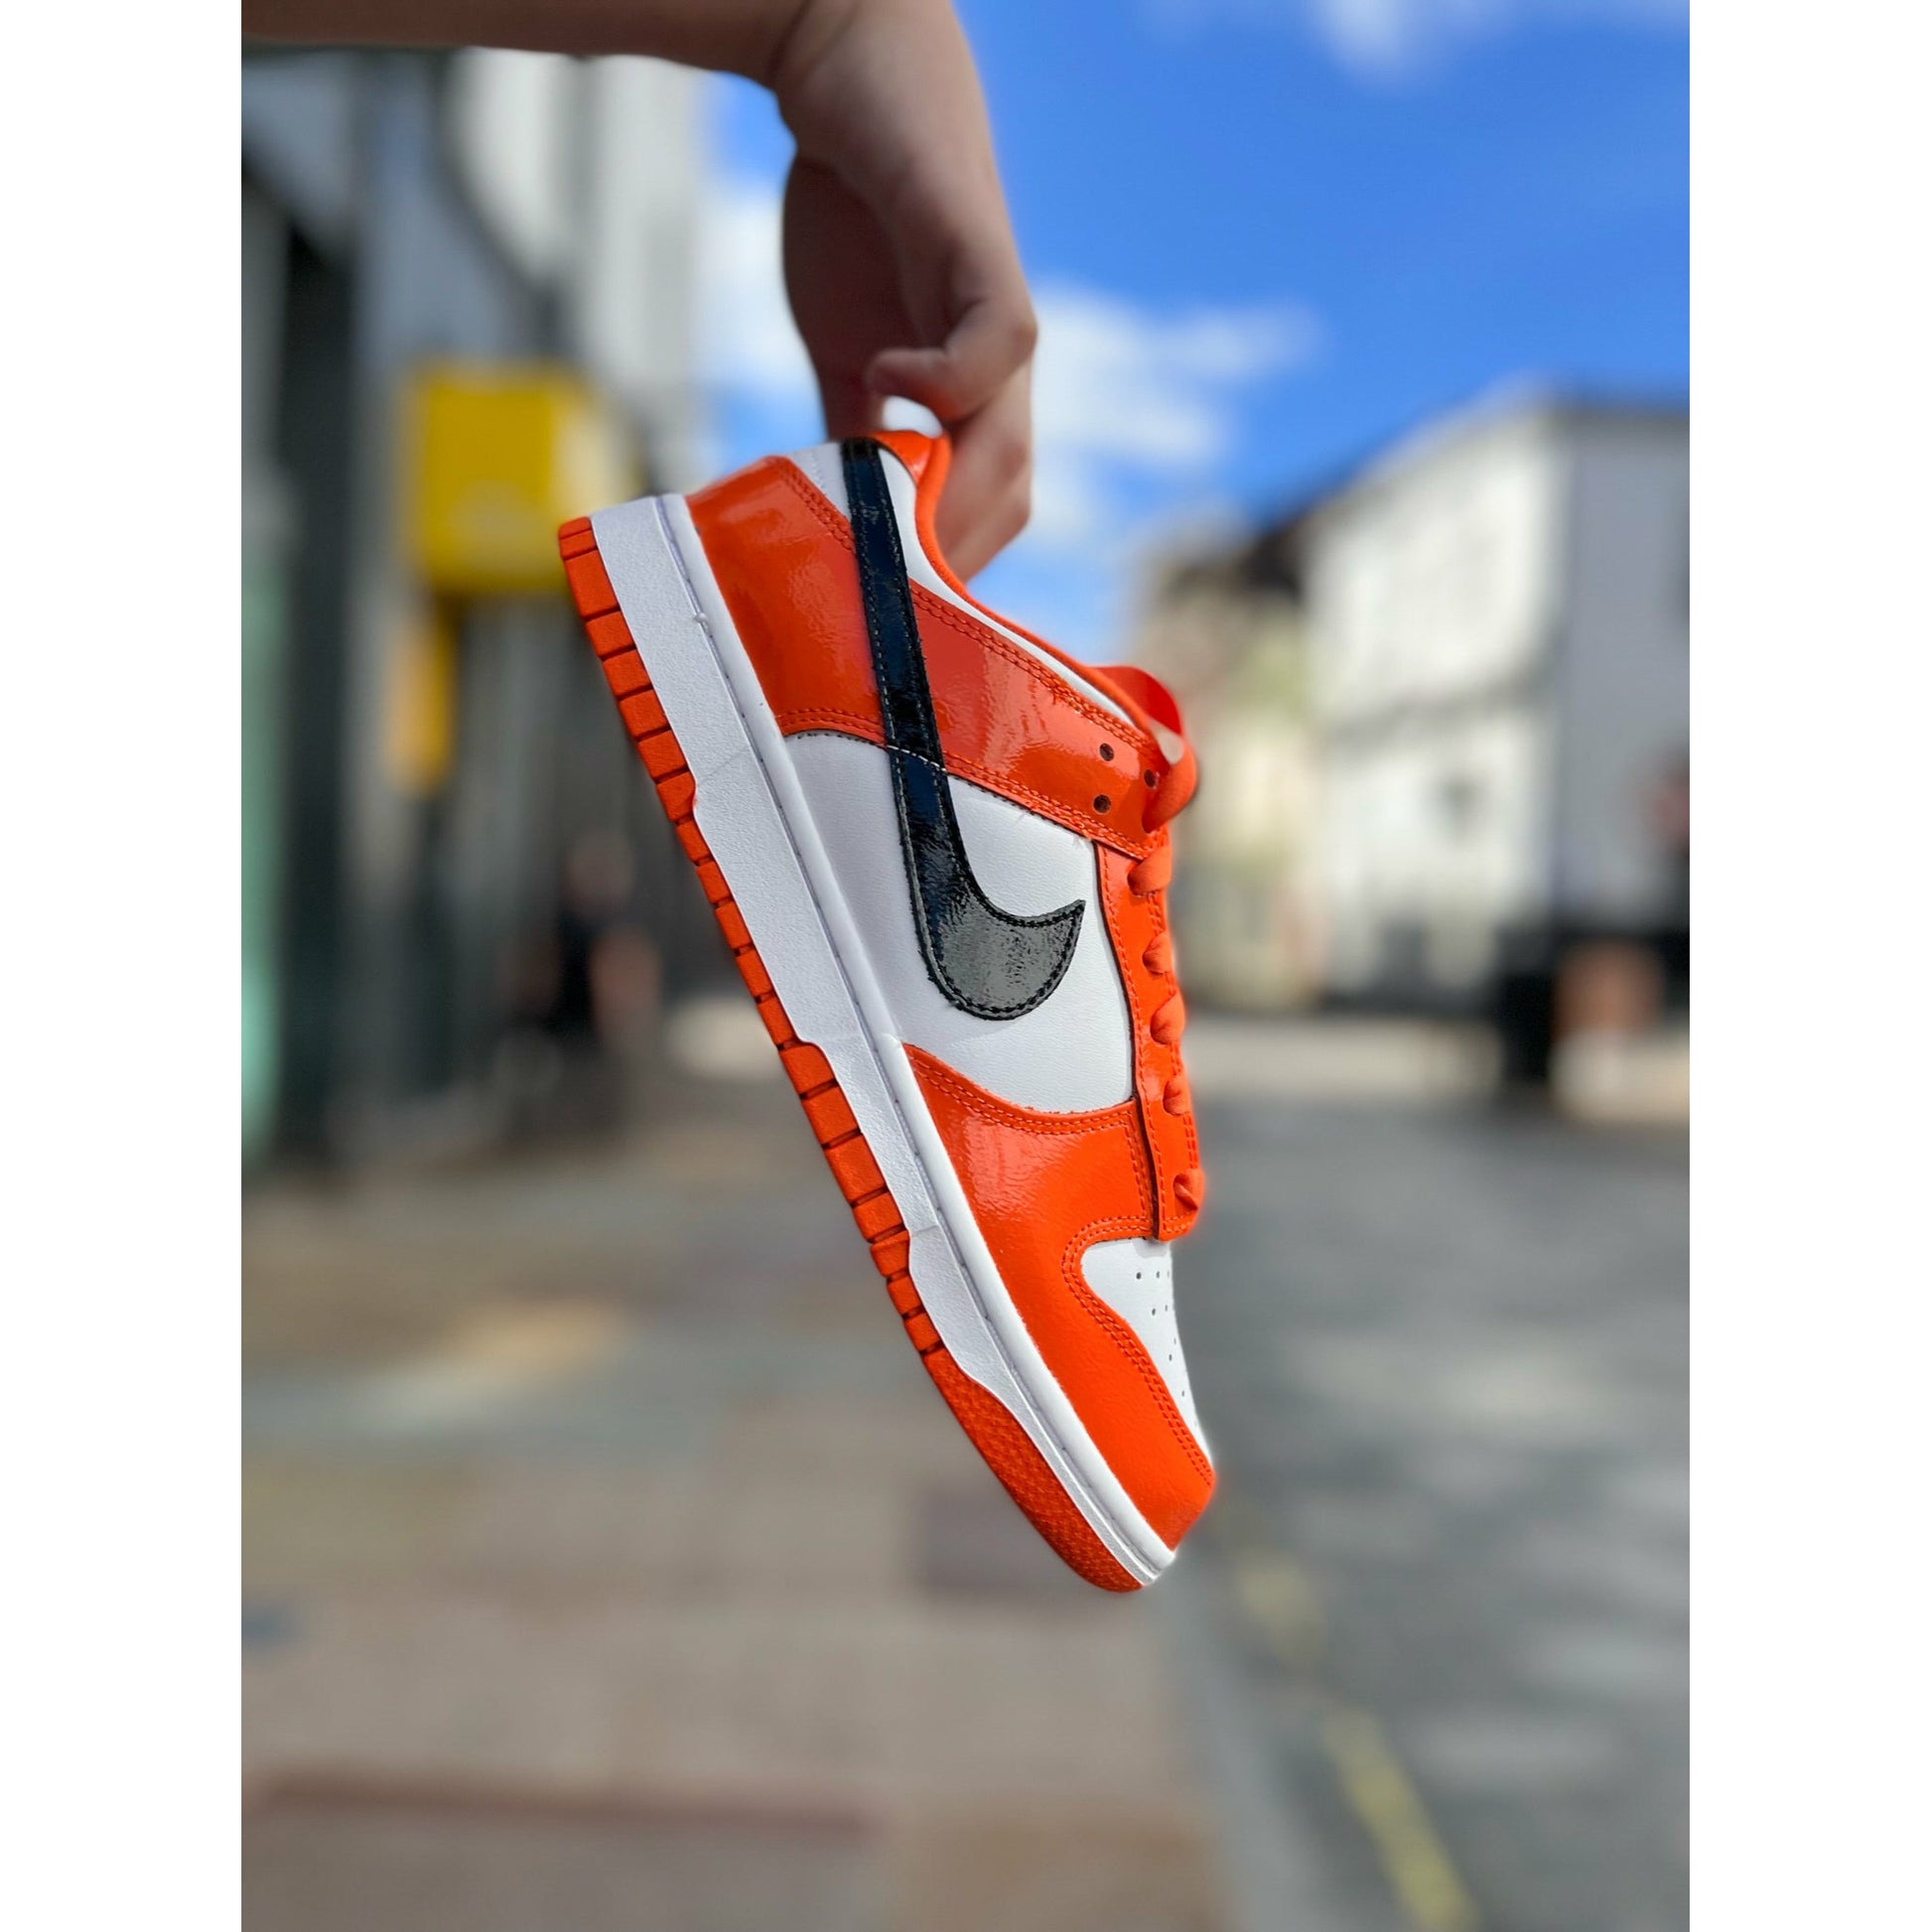 Nike Dunk Low Patent Halloween (W) from Nike